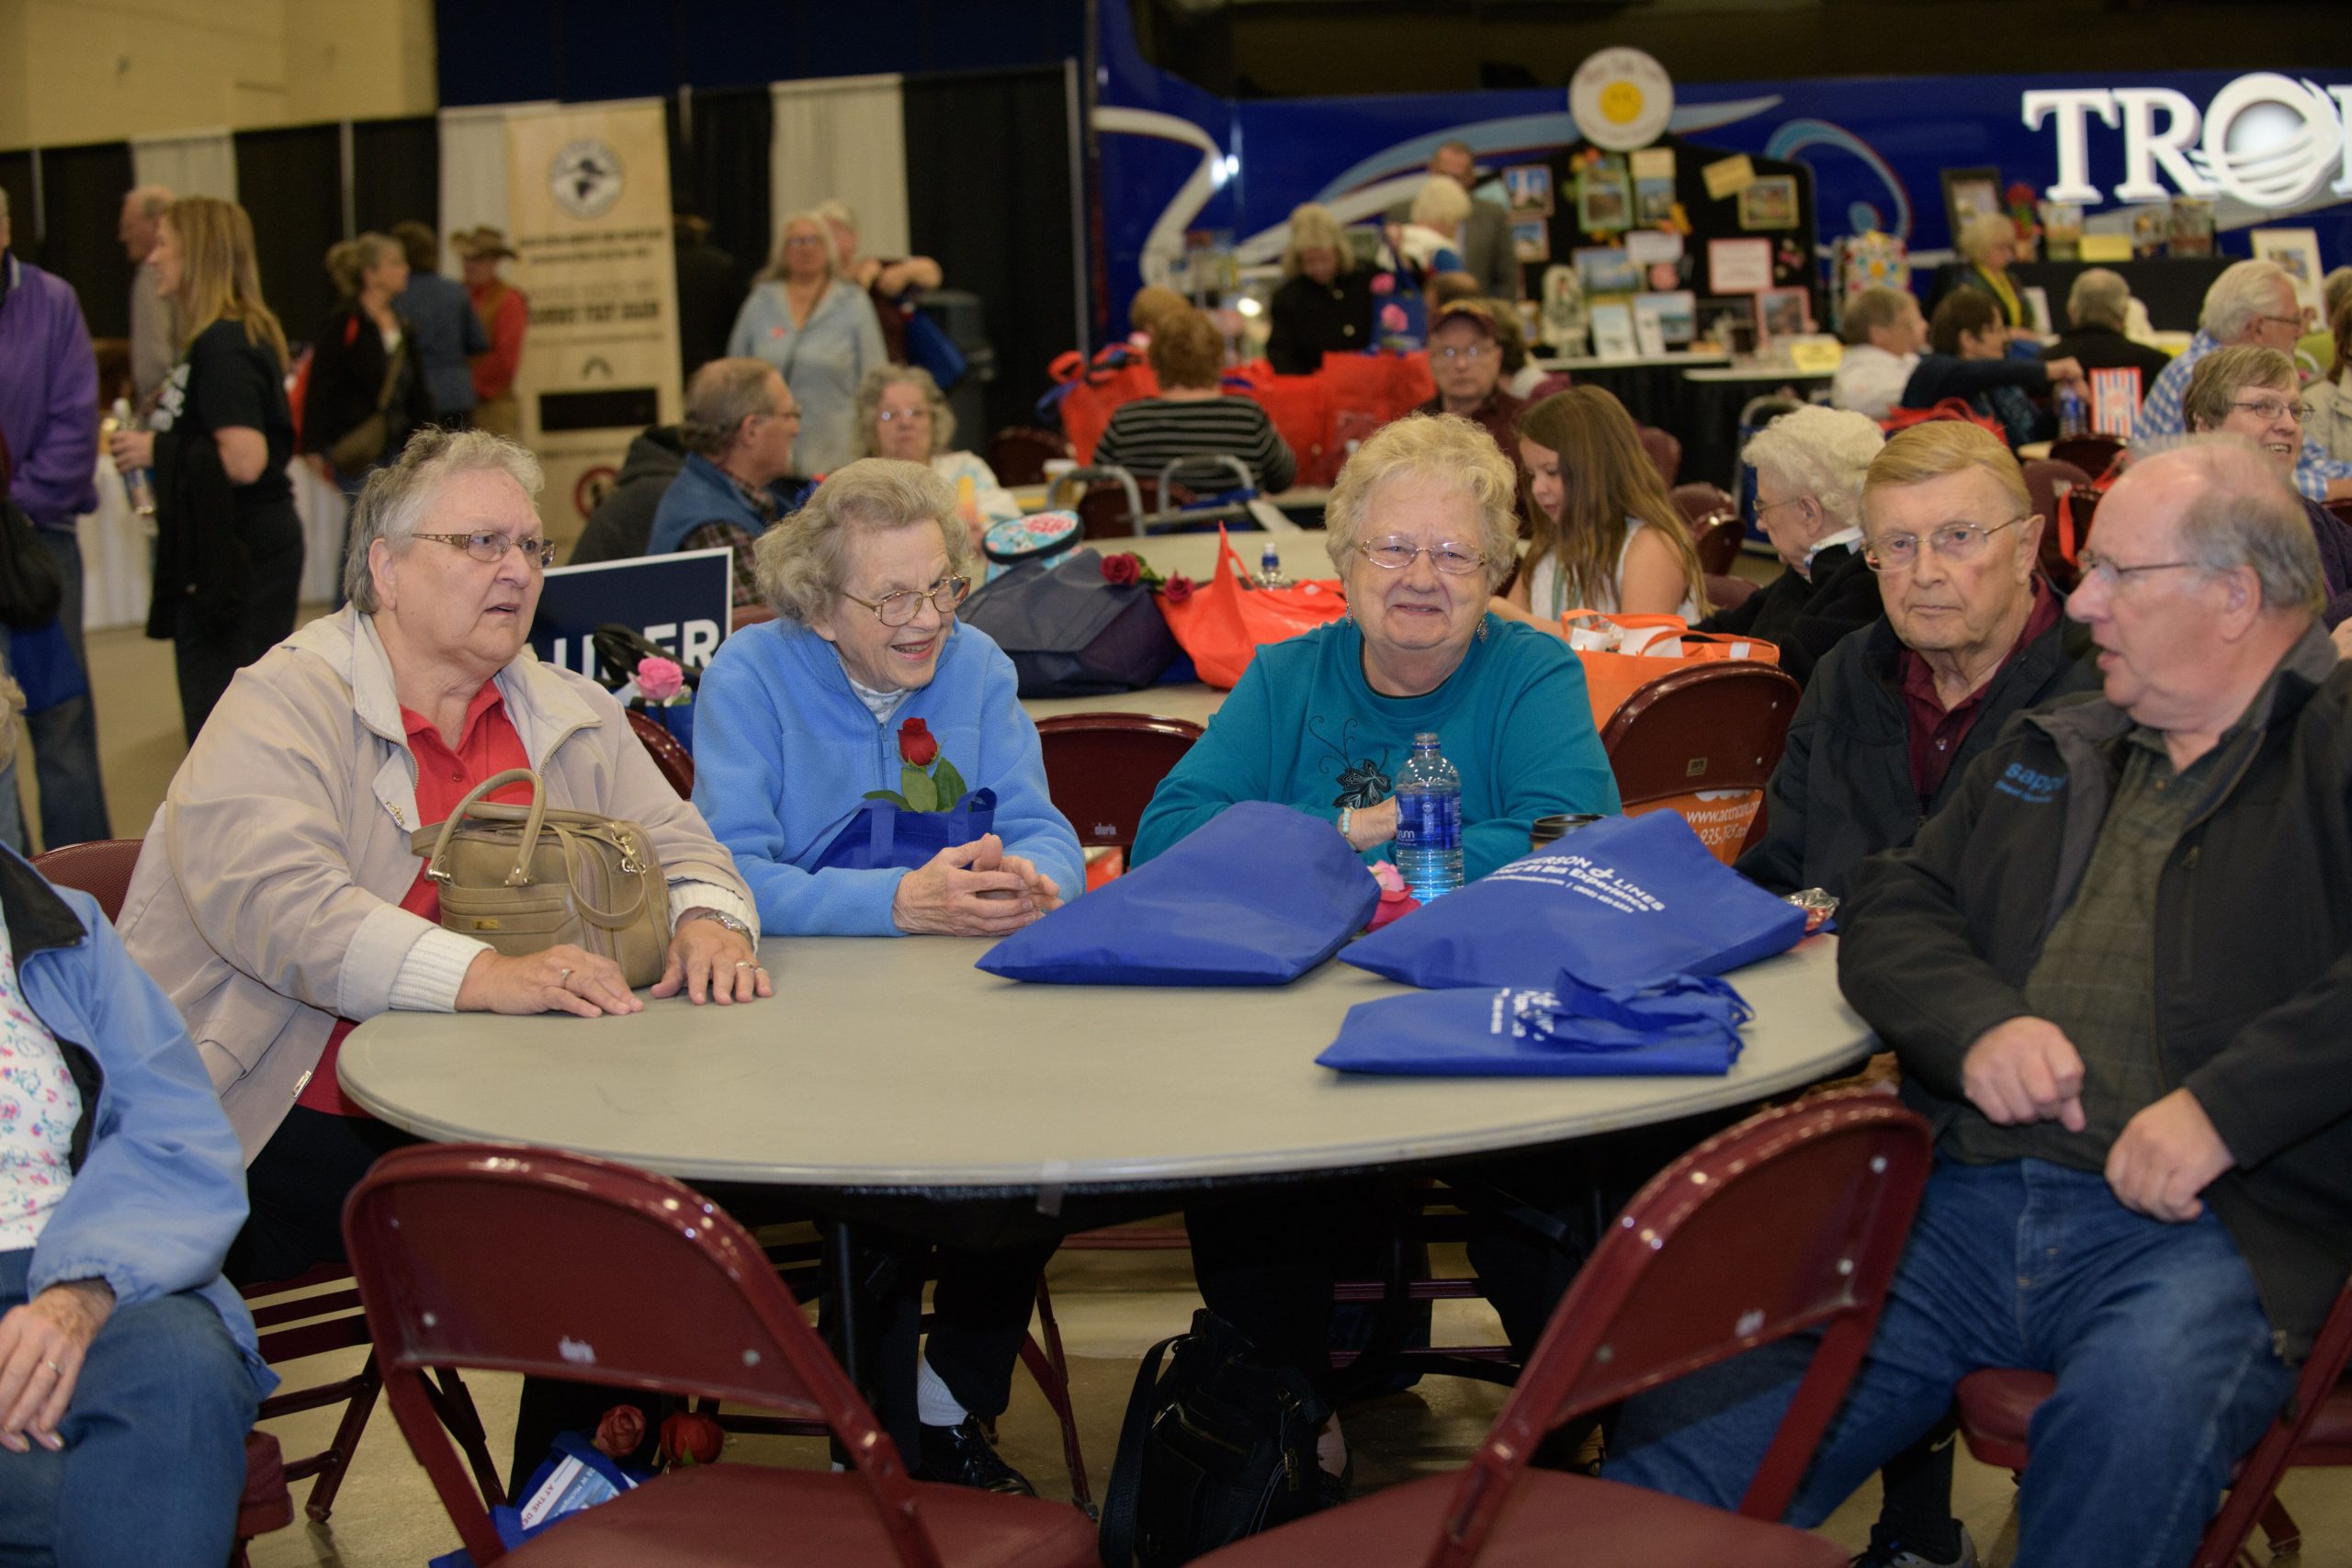 Annual Senior GO Show Tuesday at the DECC and the Parking and Admission are FREE!